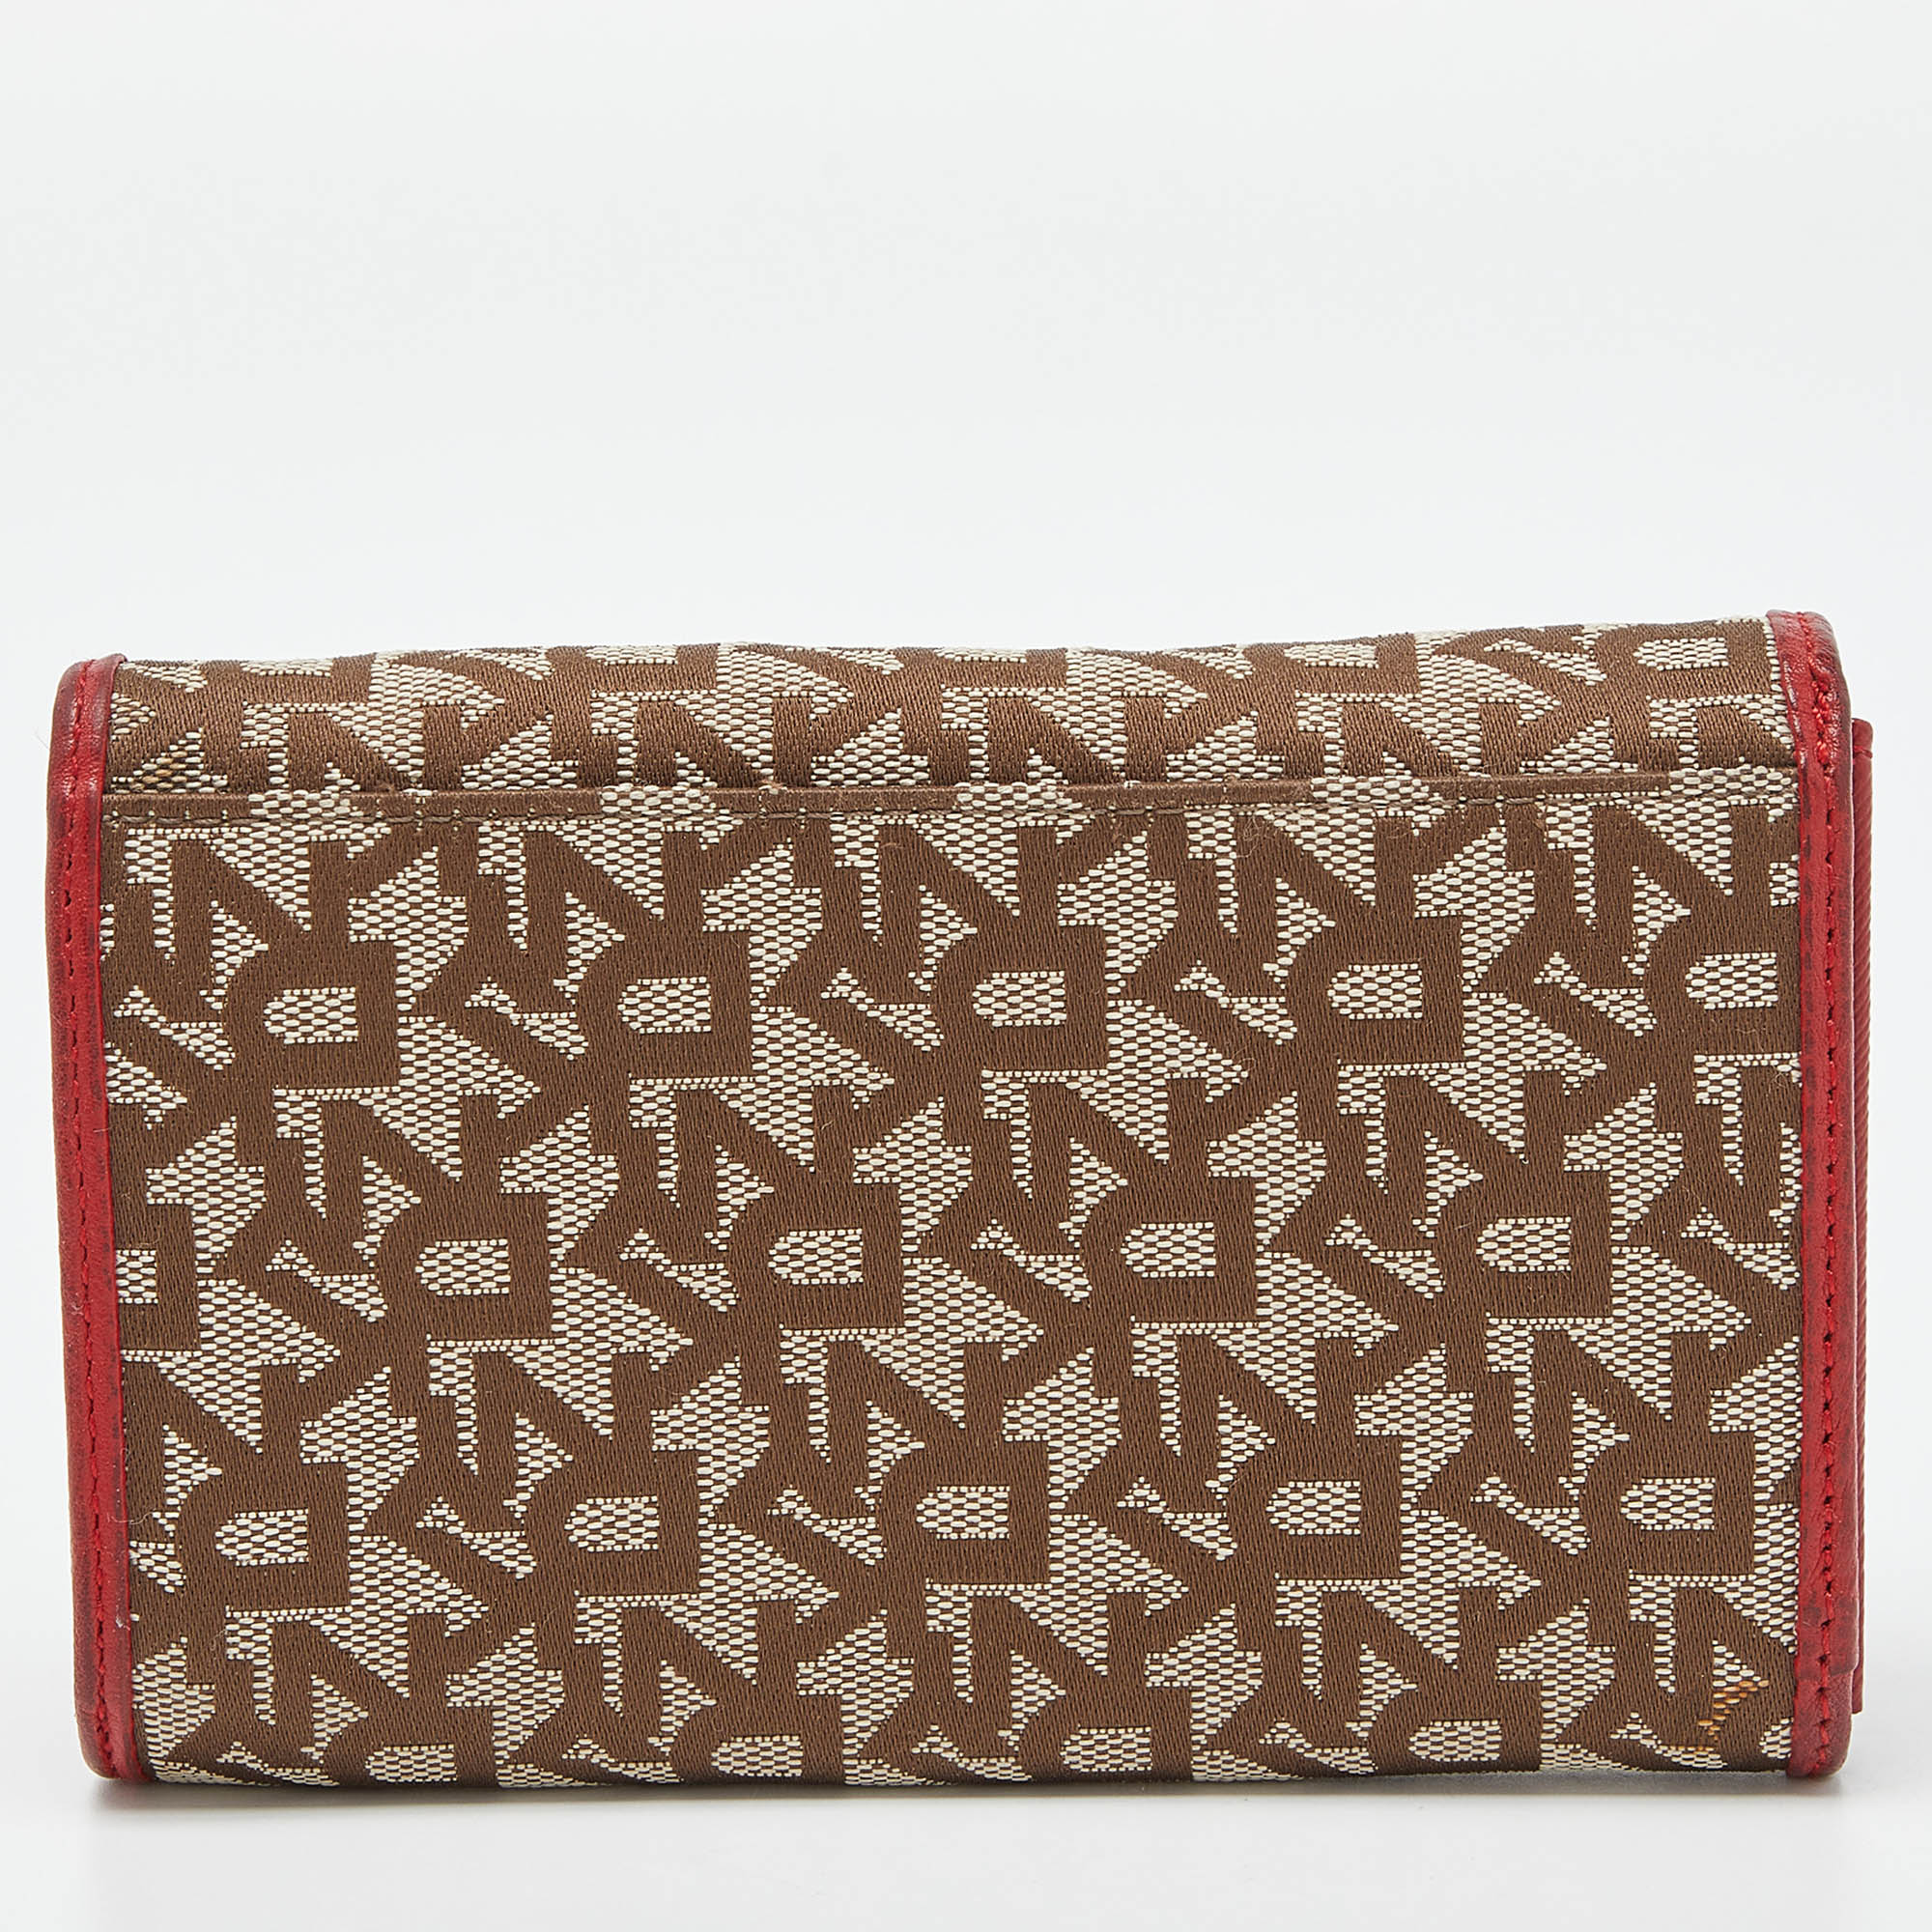 DKNY Beige/Red Signature Canvas And Leather French Wallet